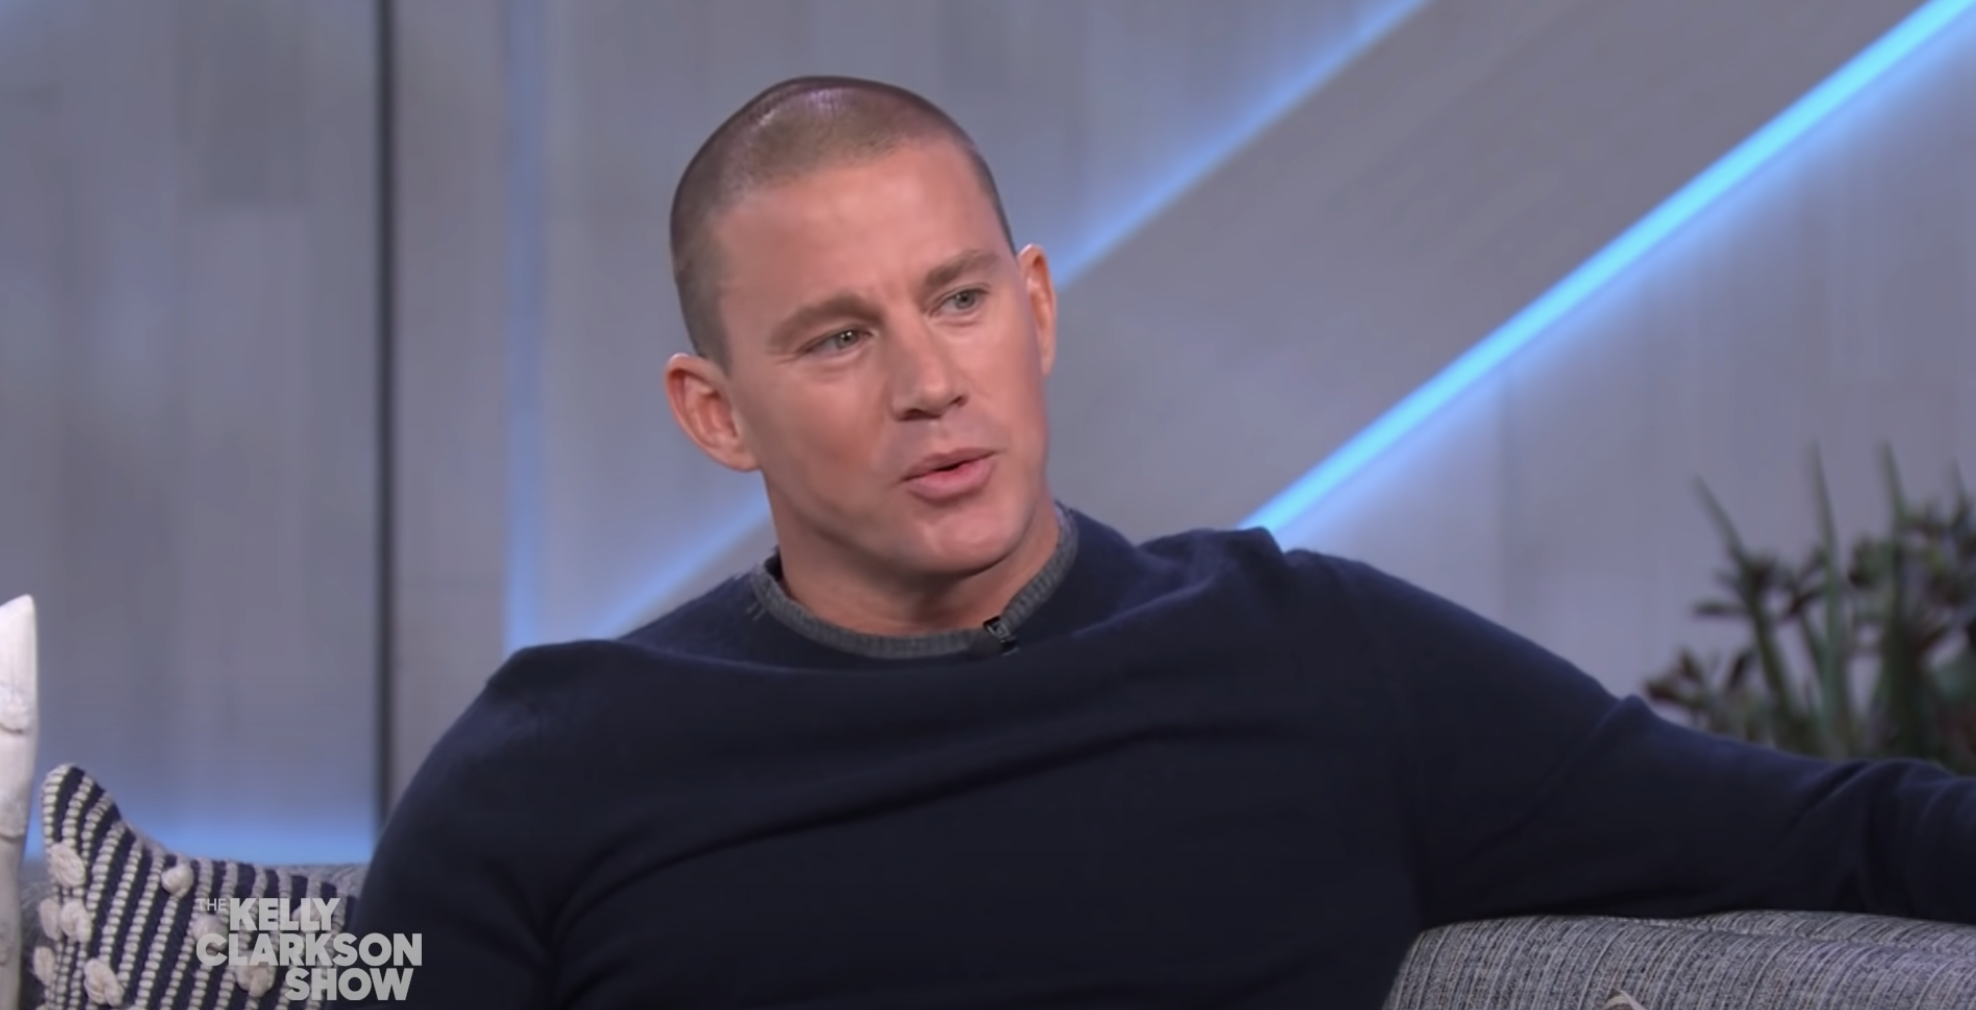 Channing on the Kelly Clarkson Show